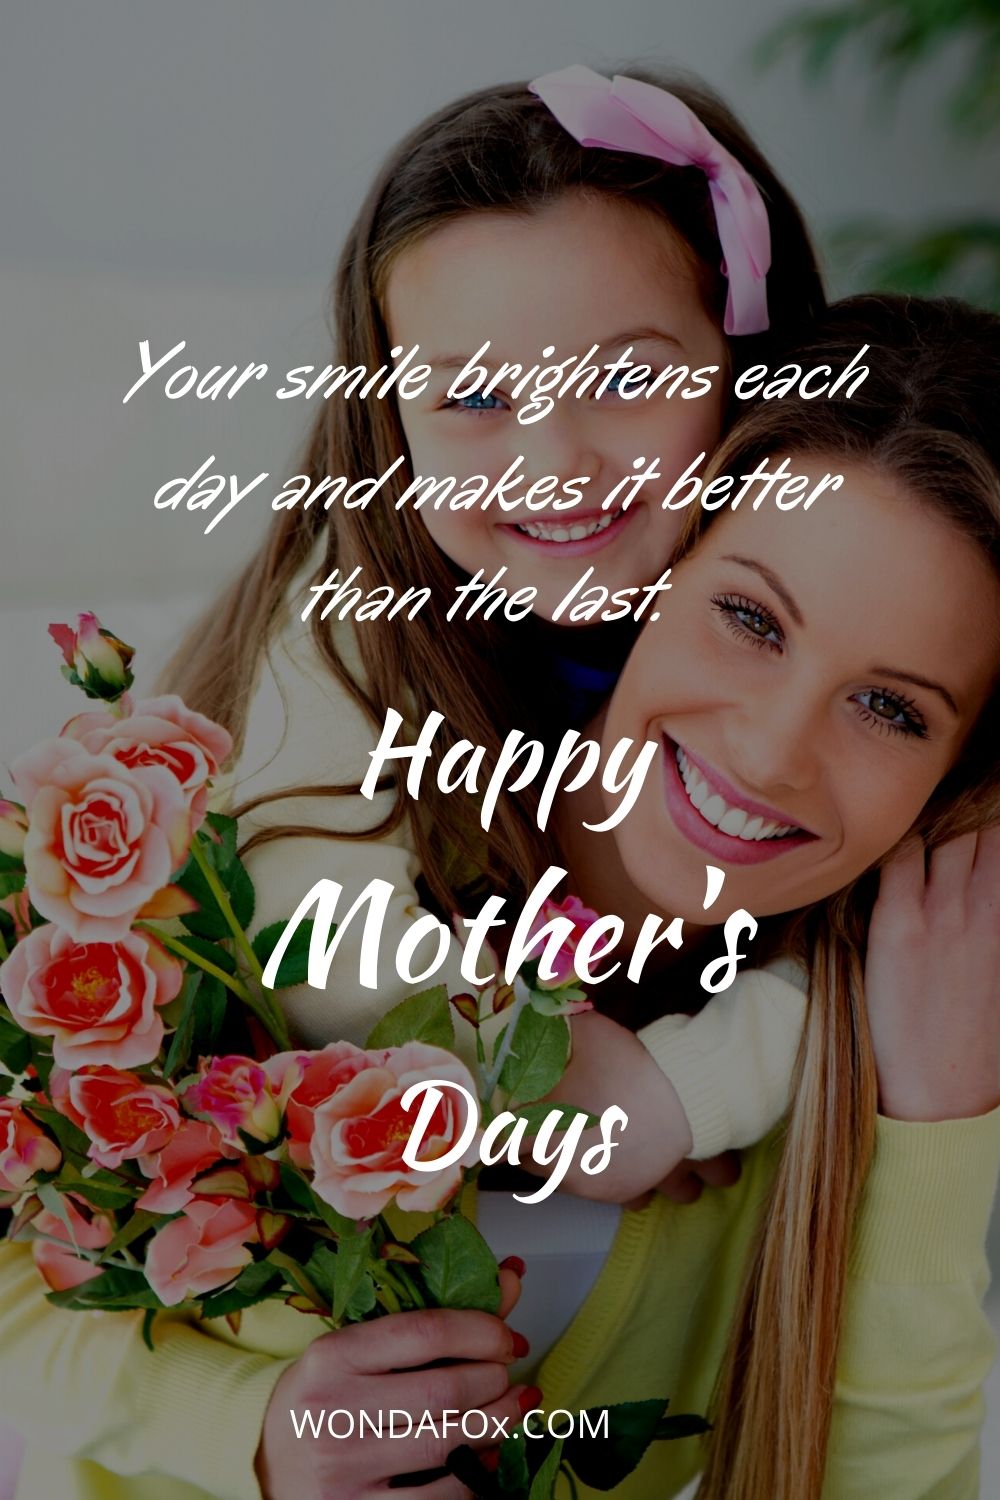 Your smile brightens each day and makes it better than the last. Happy Mother’s Day, Mom!